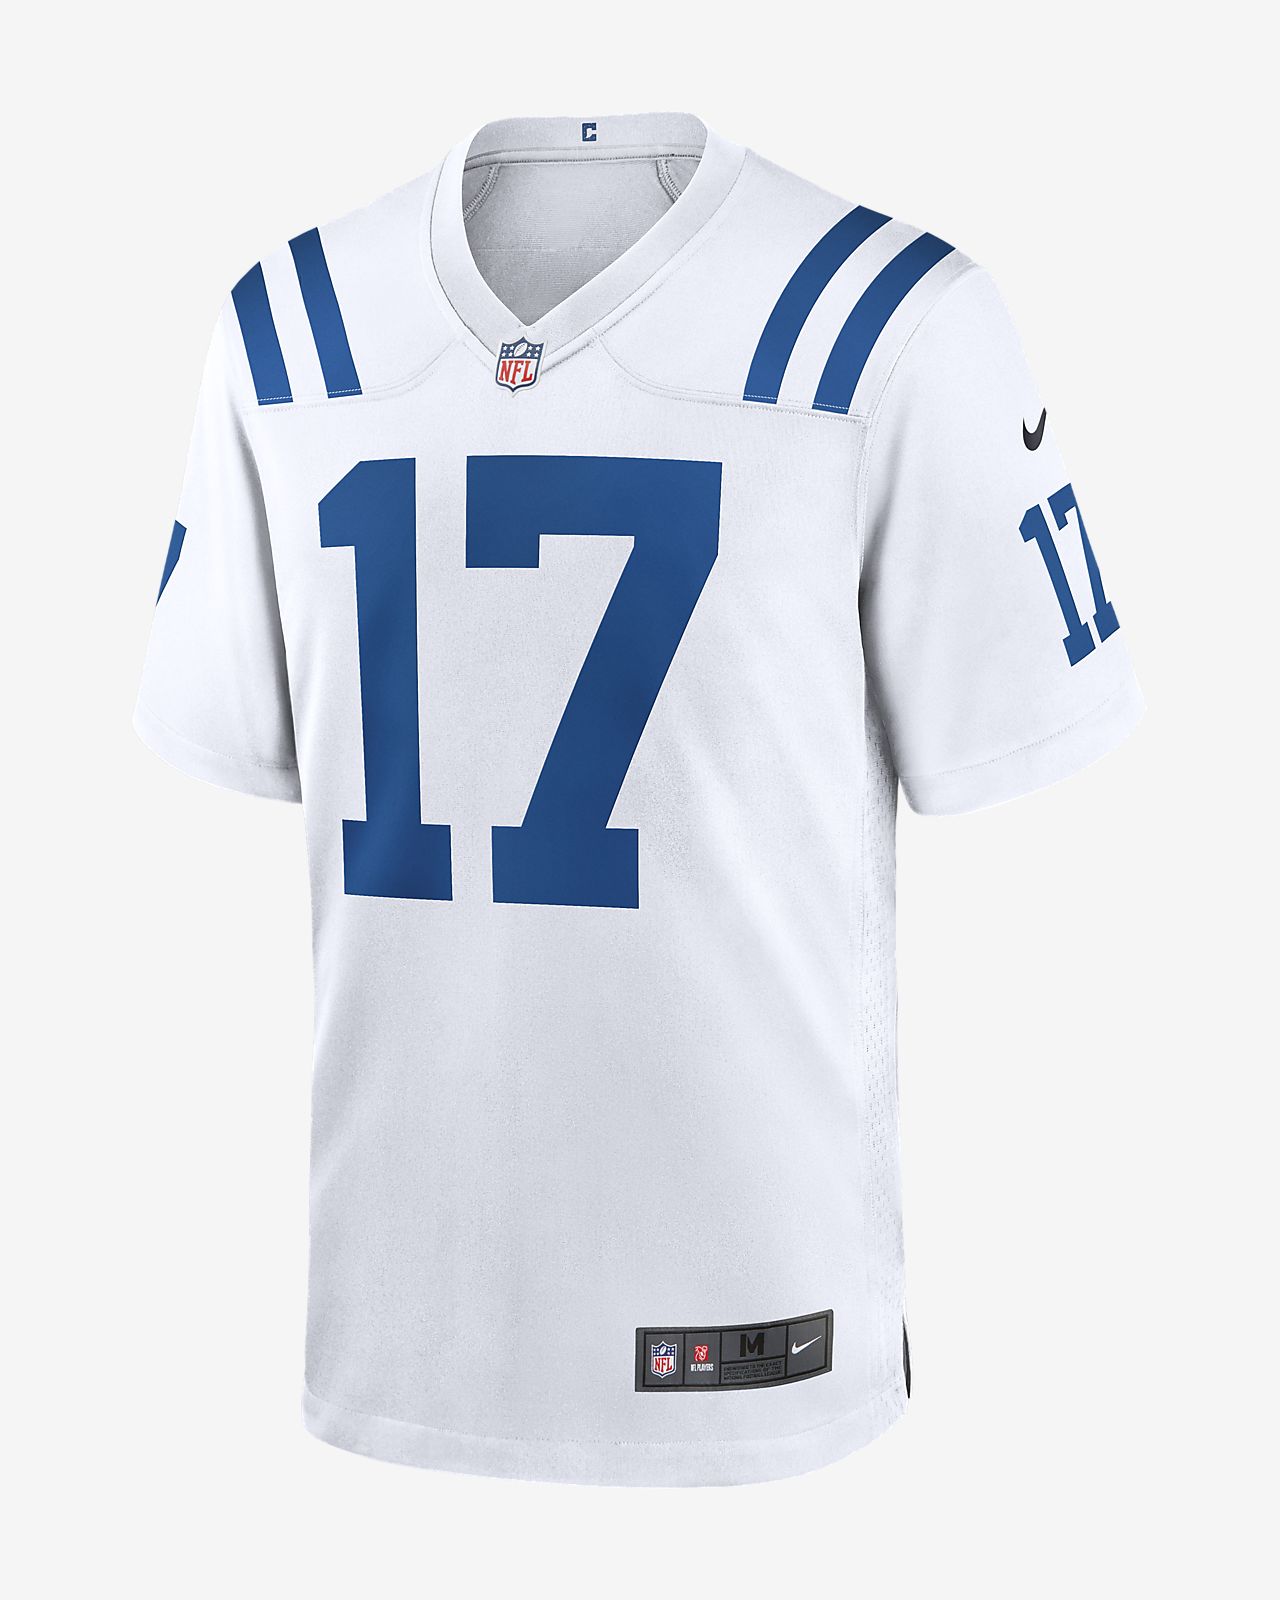 rivers jersey colts